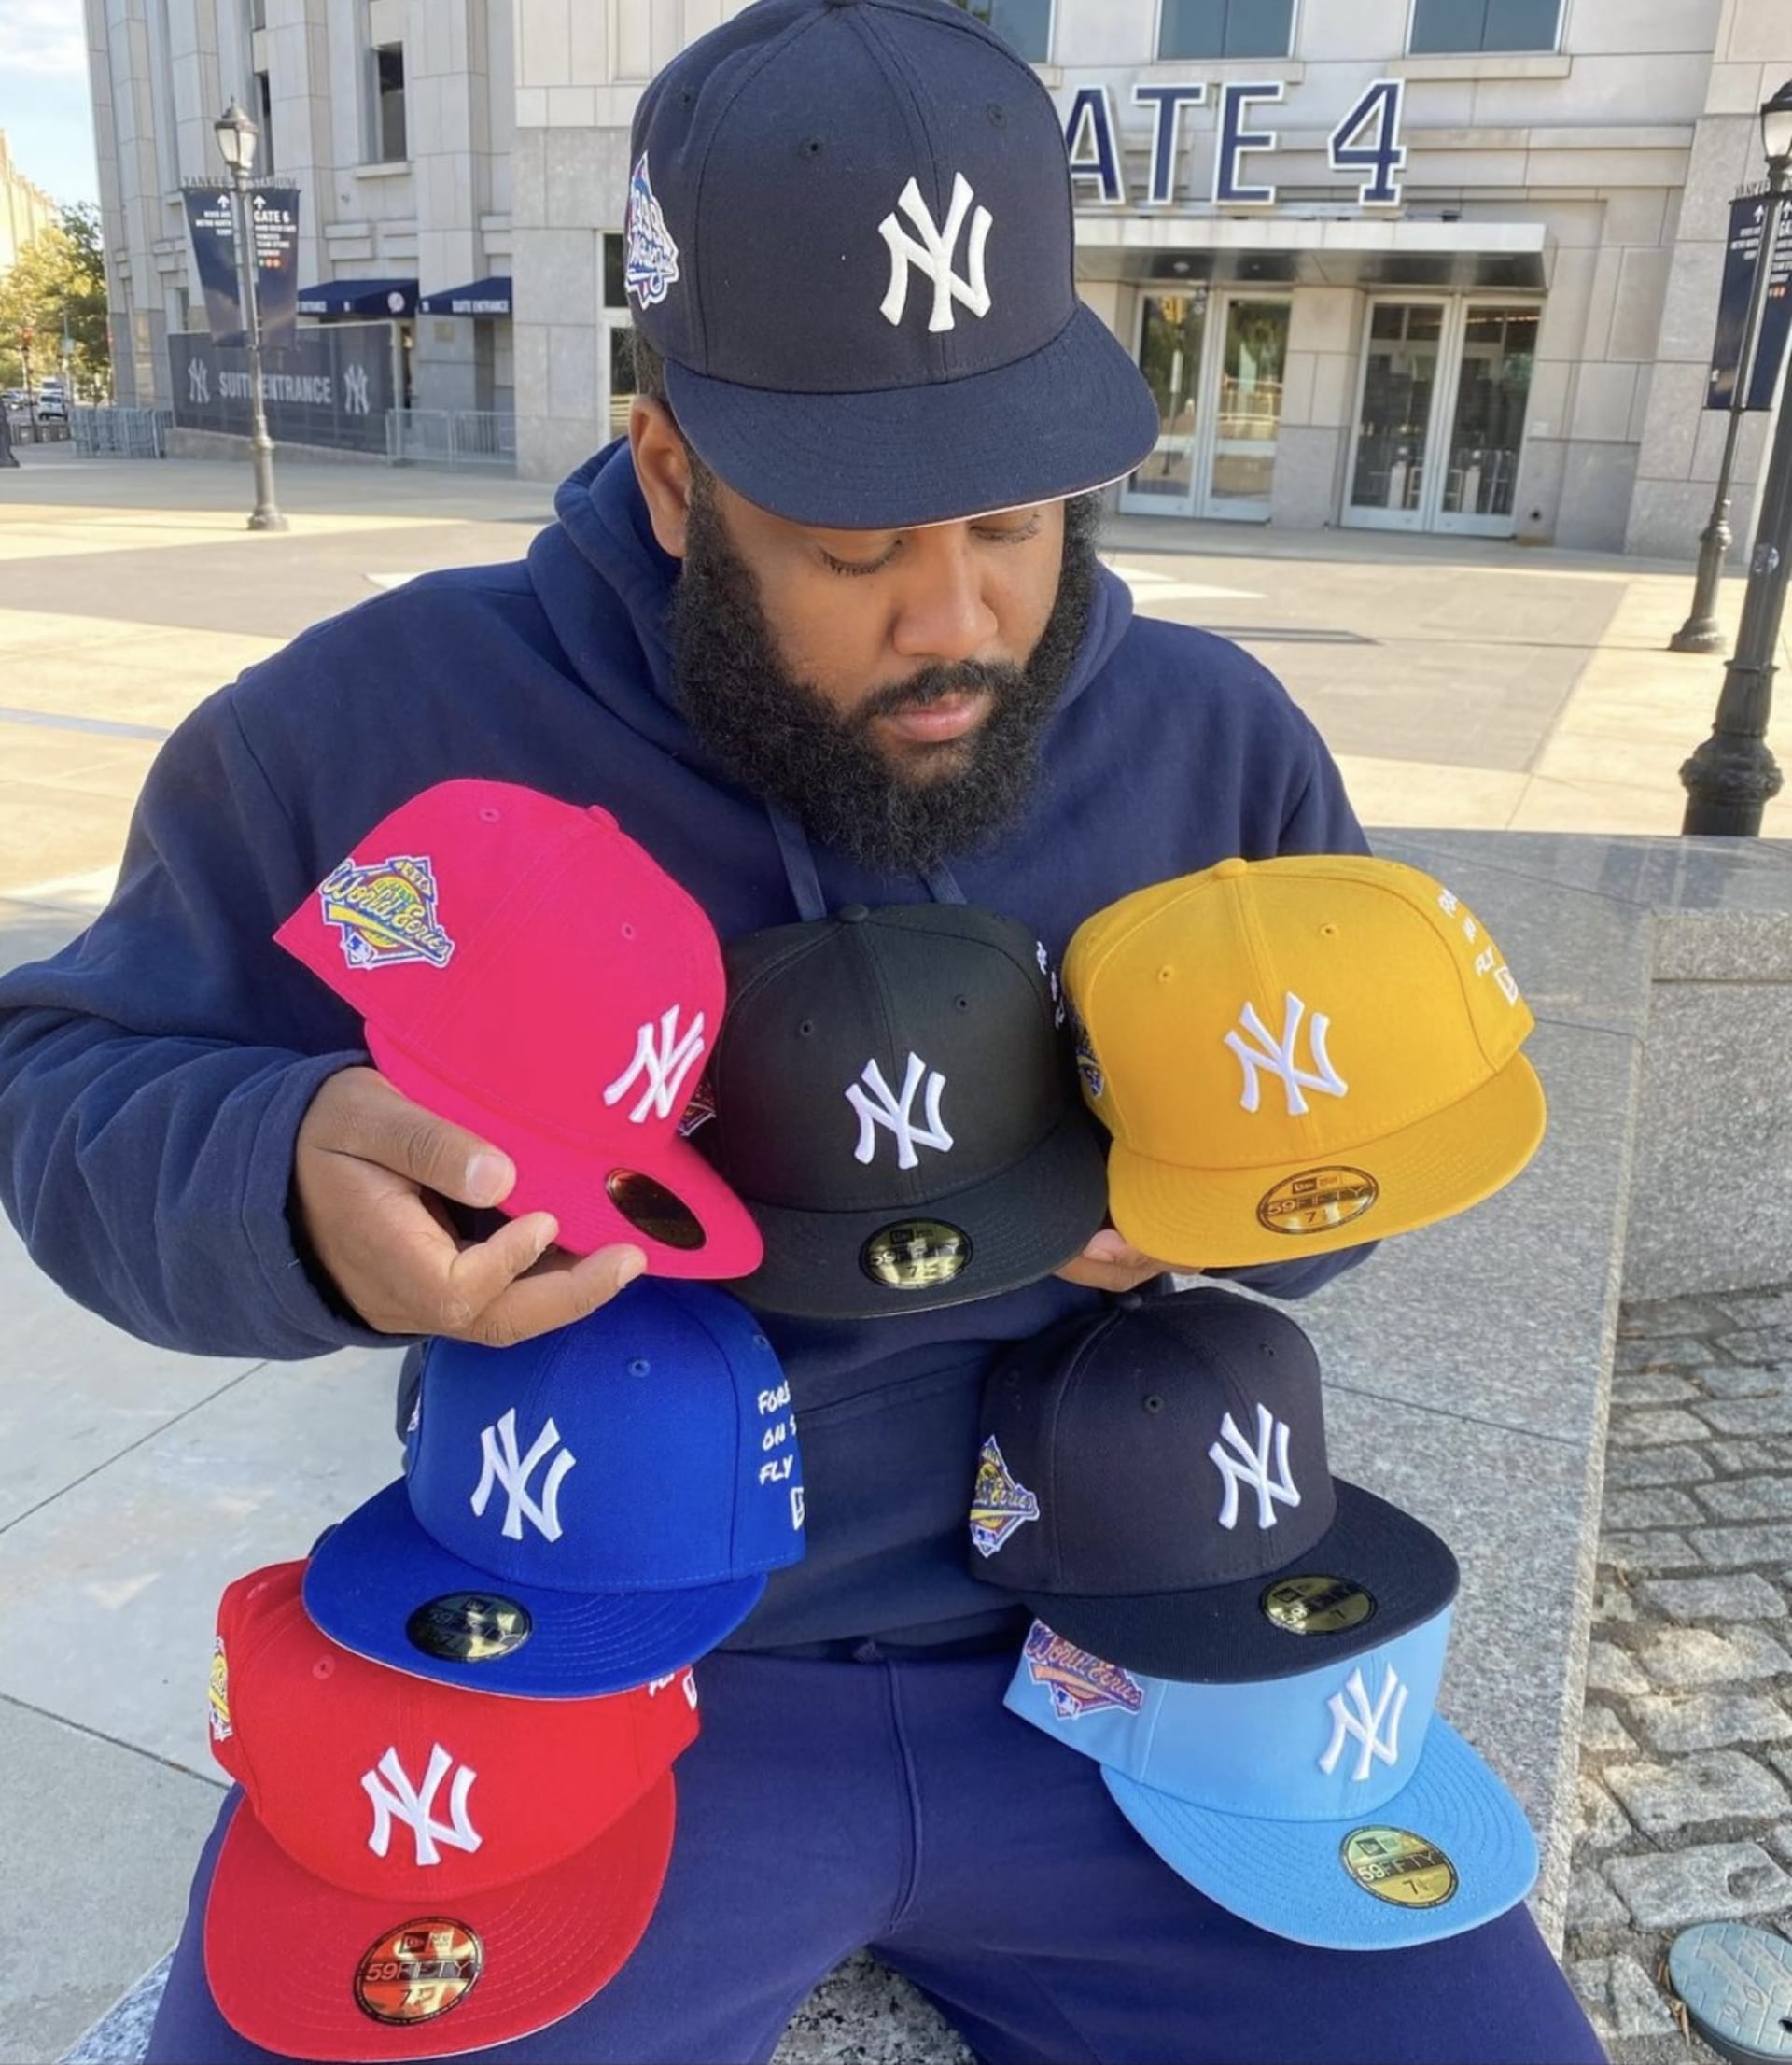 Stranden frelsen Udtømning How Custom Fitted Hats Have Become Must-Have Collectors' Items | Complex